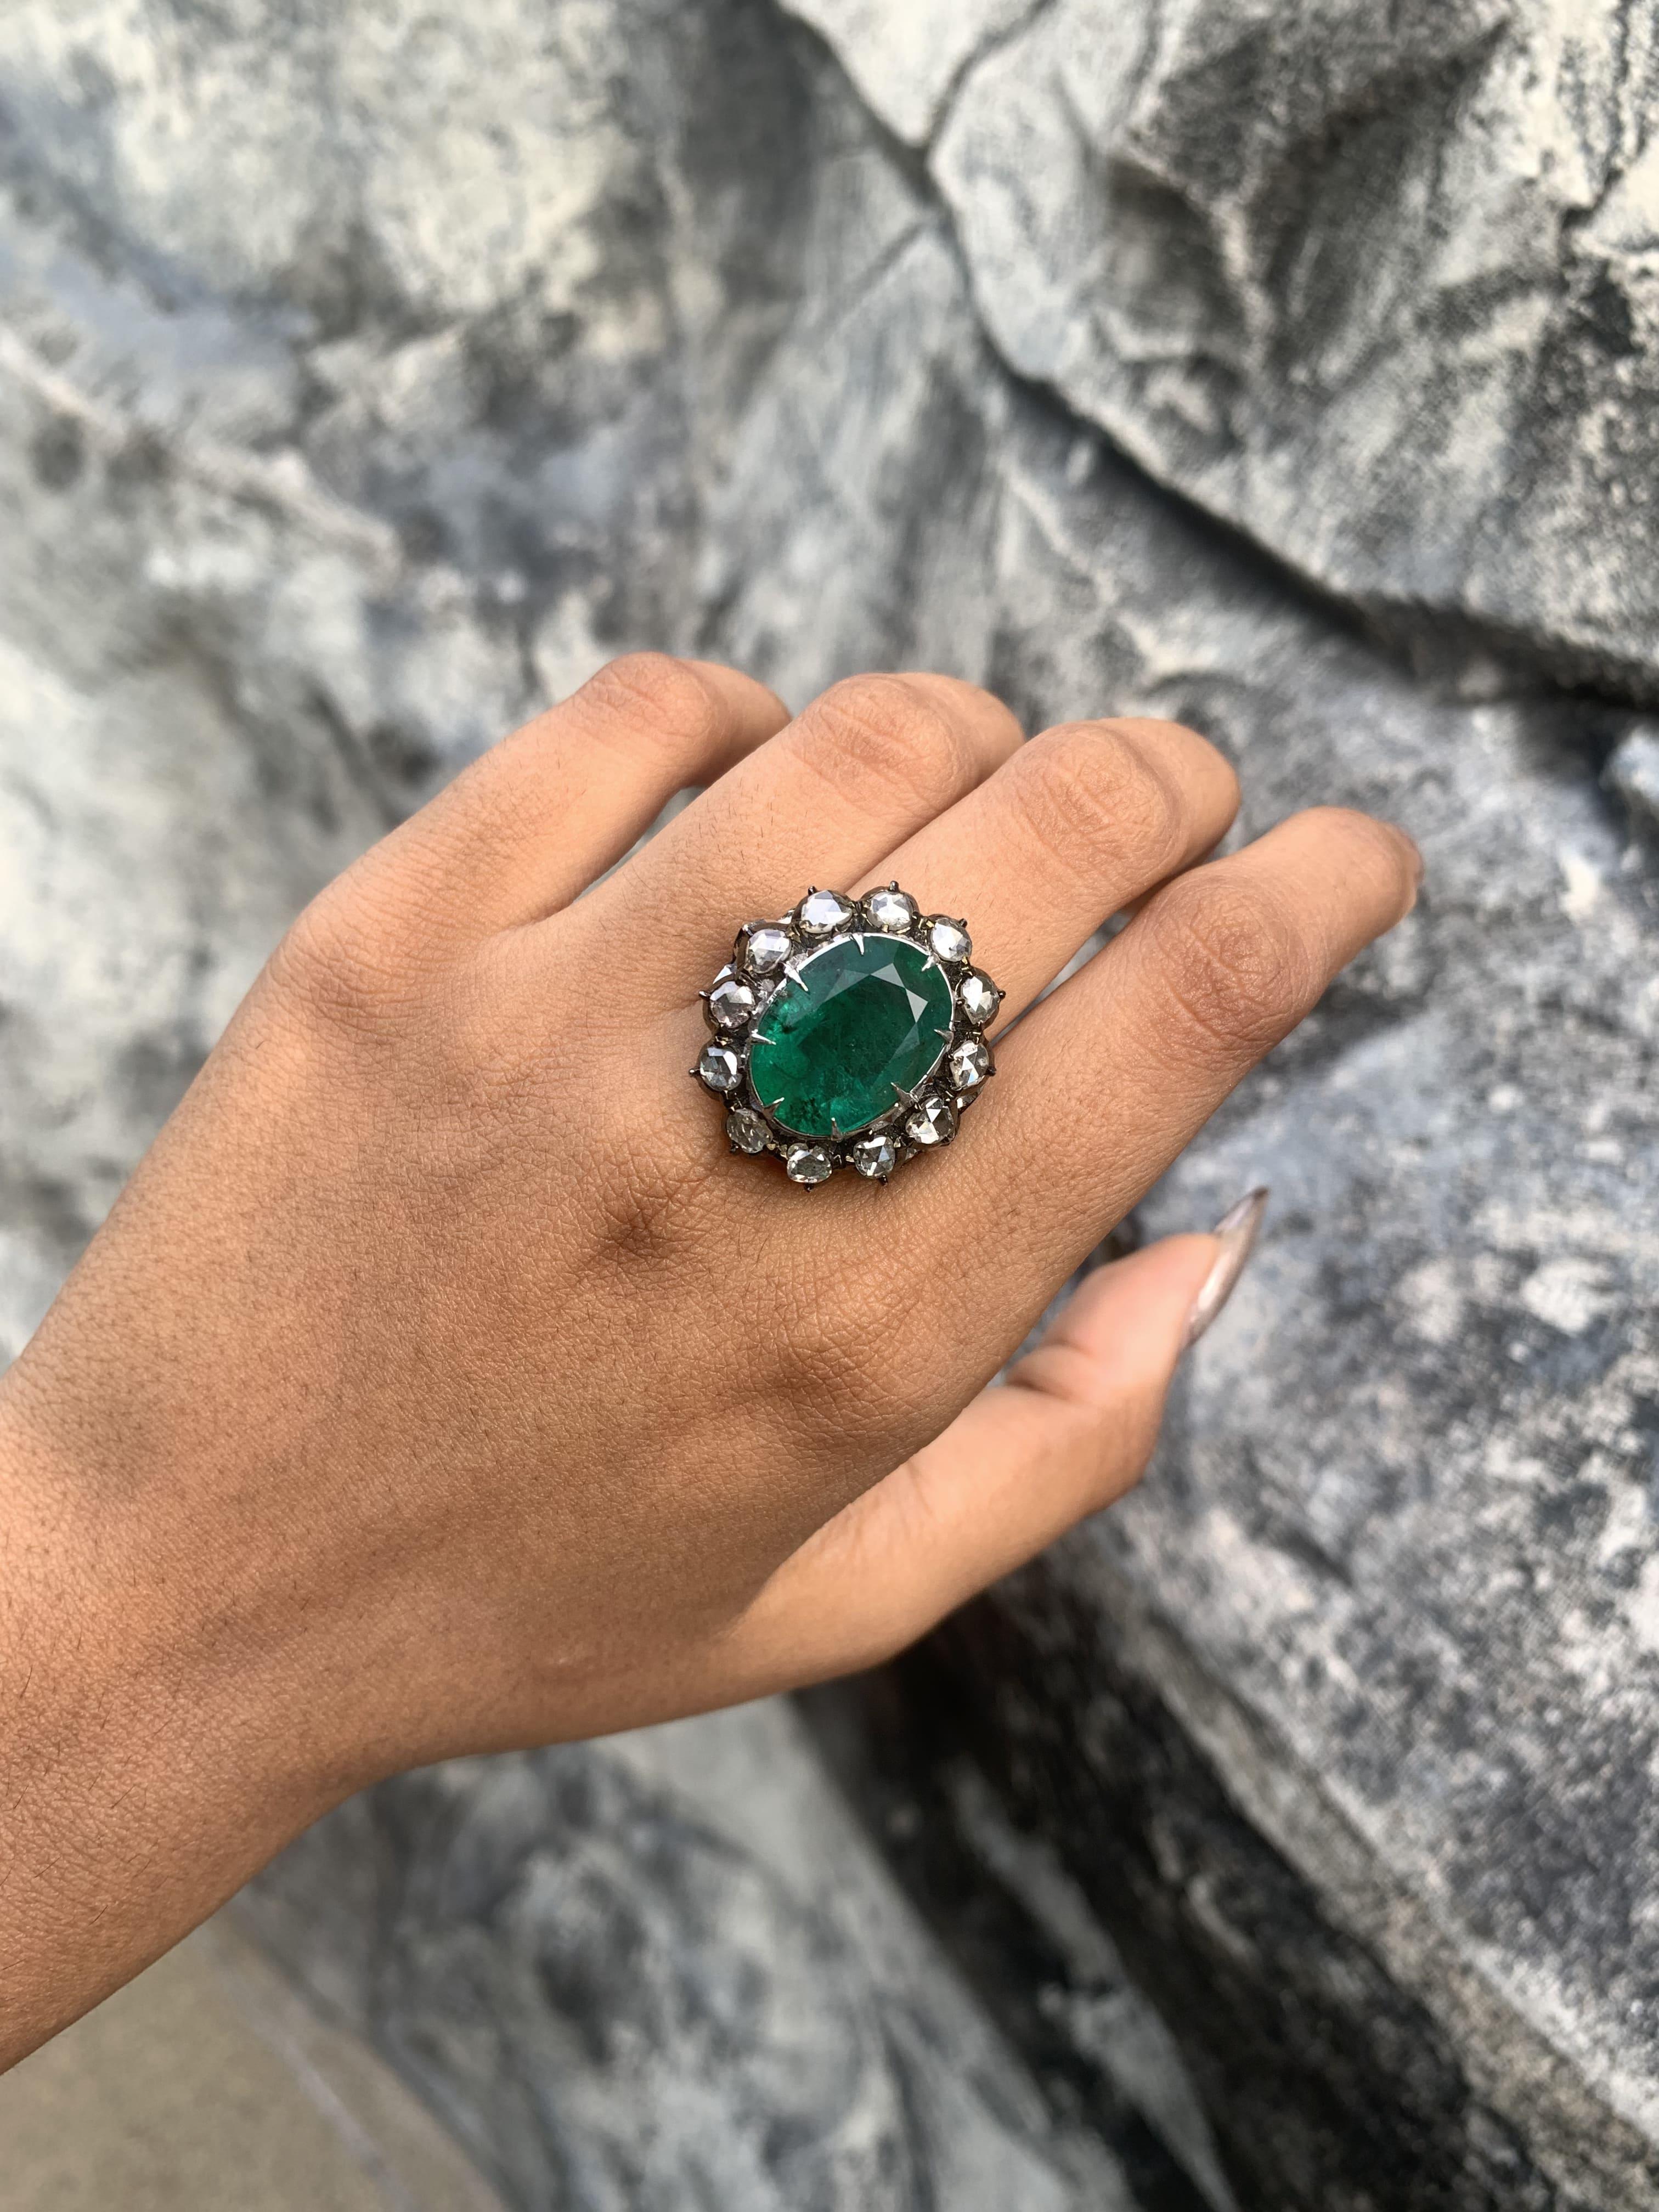 Indulge in the enchanting allure of this Art Deco-inspired masterpiece, specially handcrafted to showcase the unparalleled beauty of this 8.90 carat Zambian emerald. Hailing from the lush mines of Zambia, this emerald is a testament to nature's